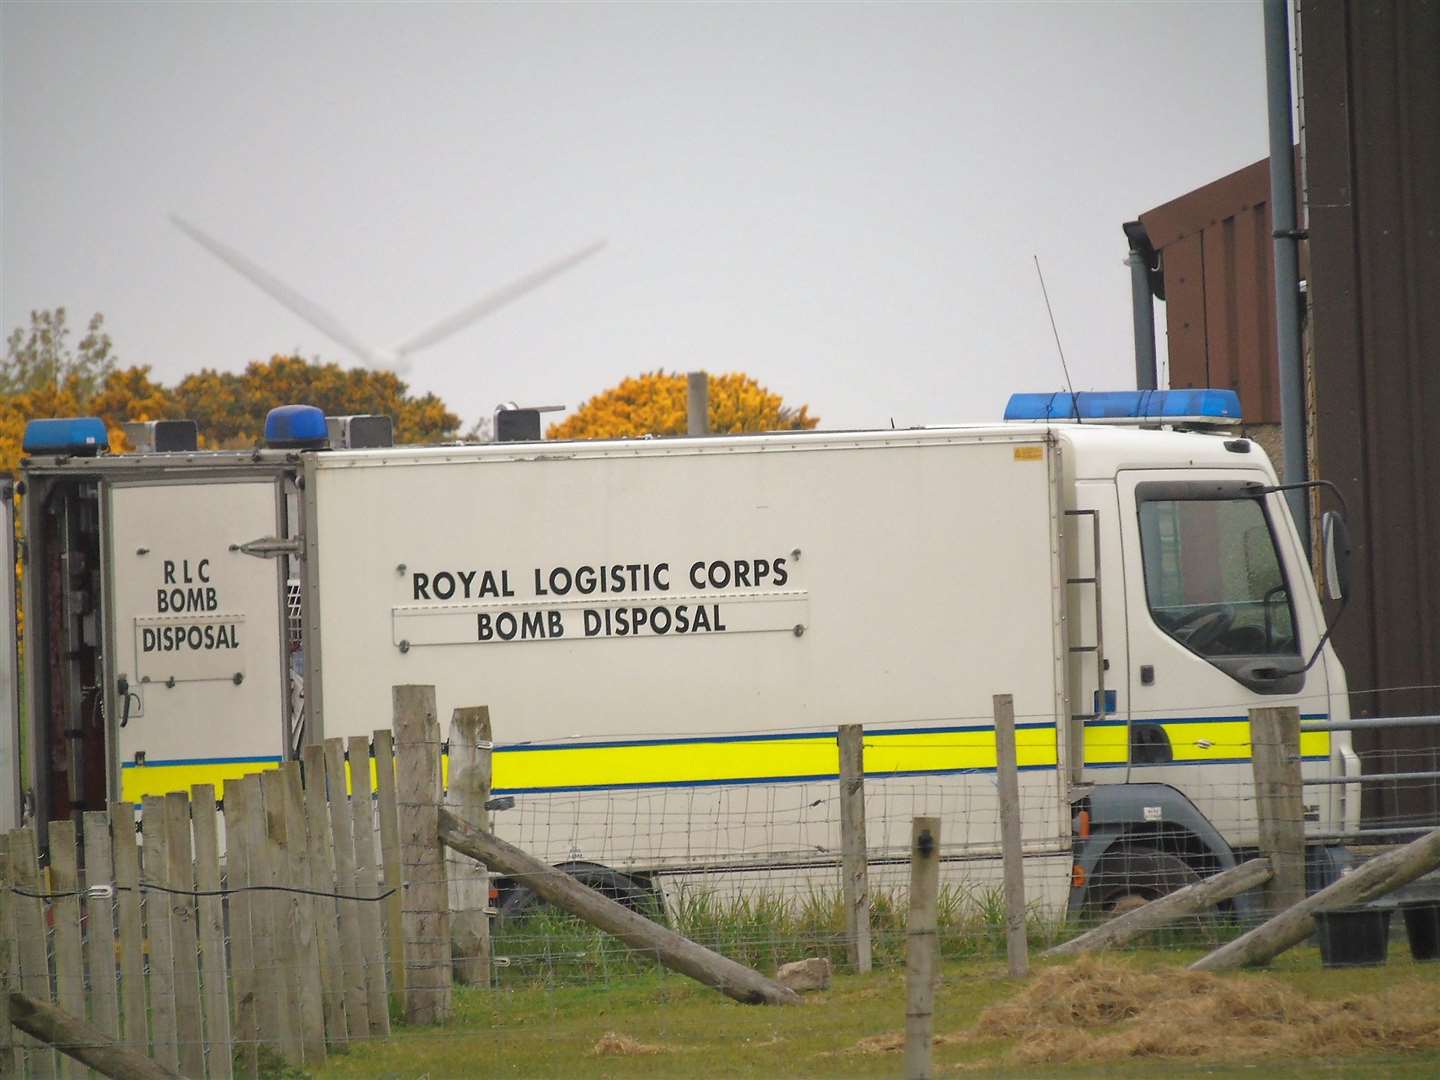 An army bomb disposal team from Edinburgh arrived at 5.15pm to the site.